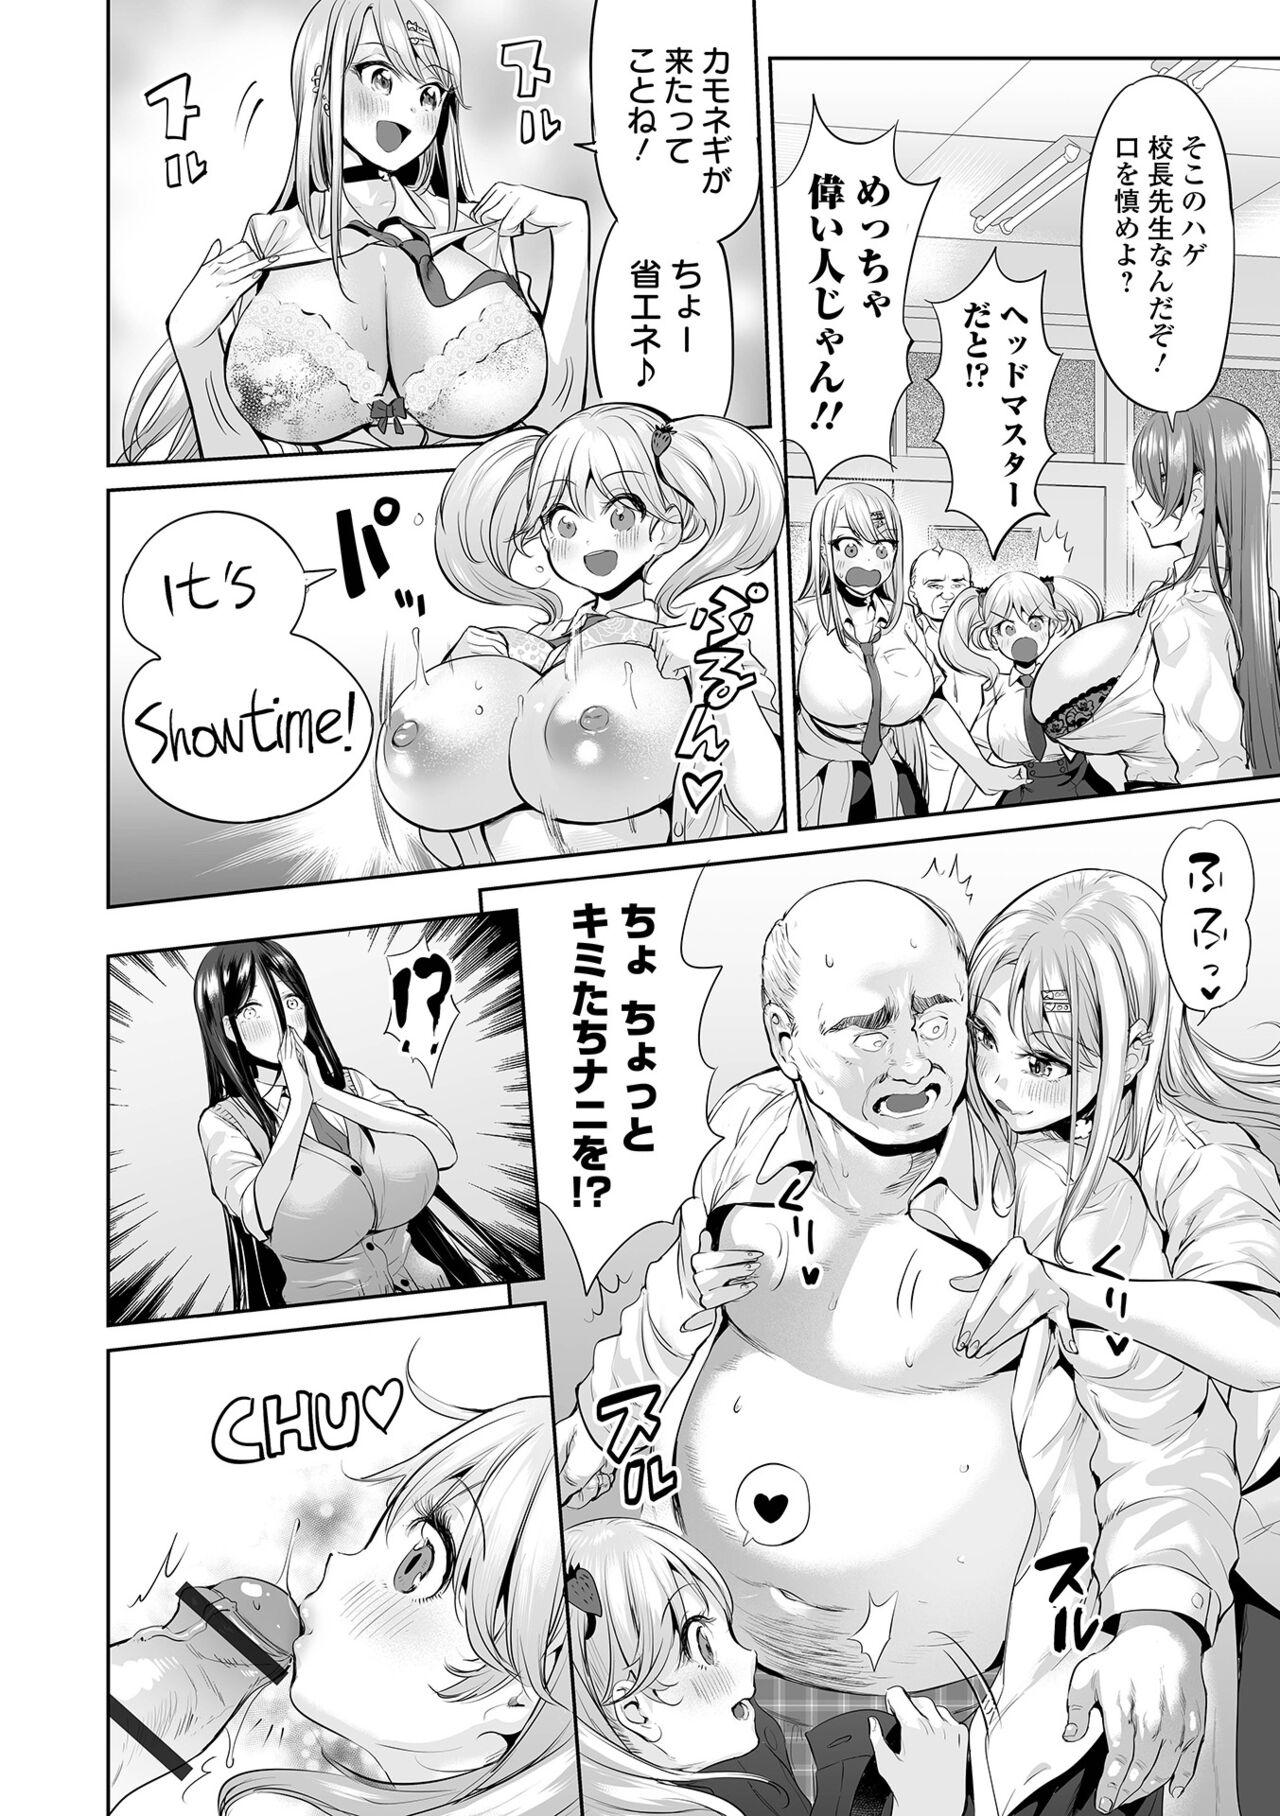 Leaked Ike! Bitch seito-kai Clothed - Page 10